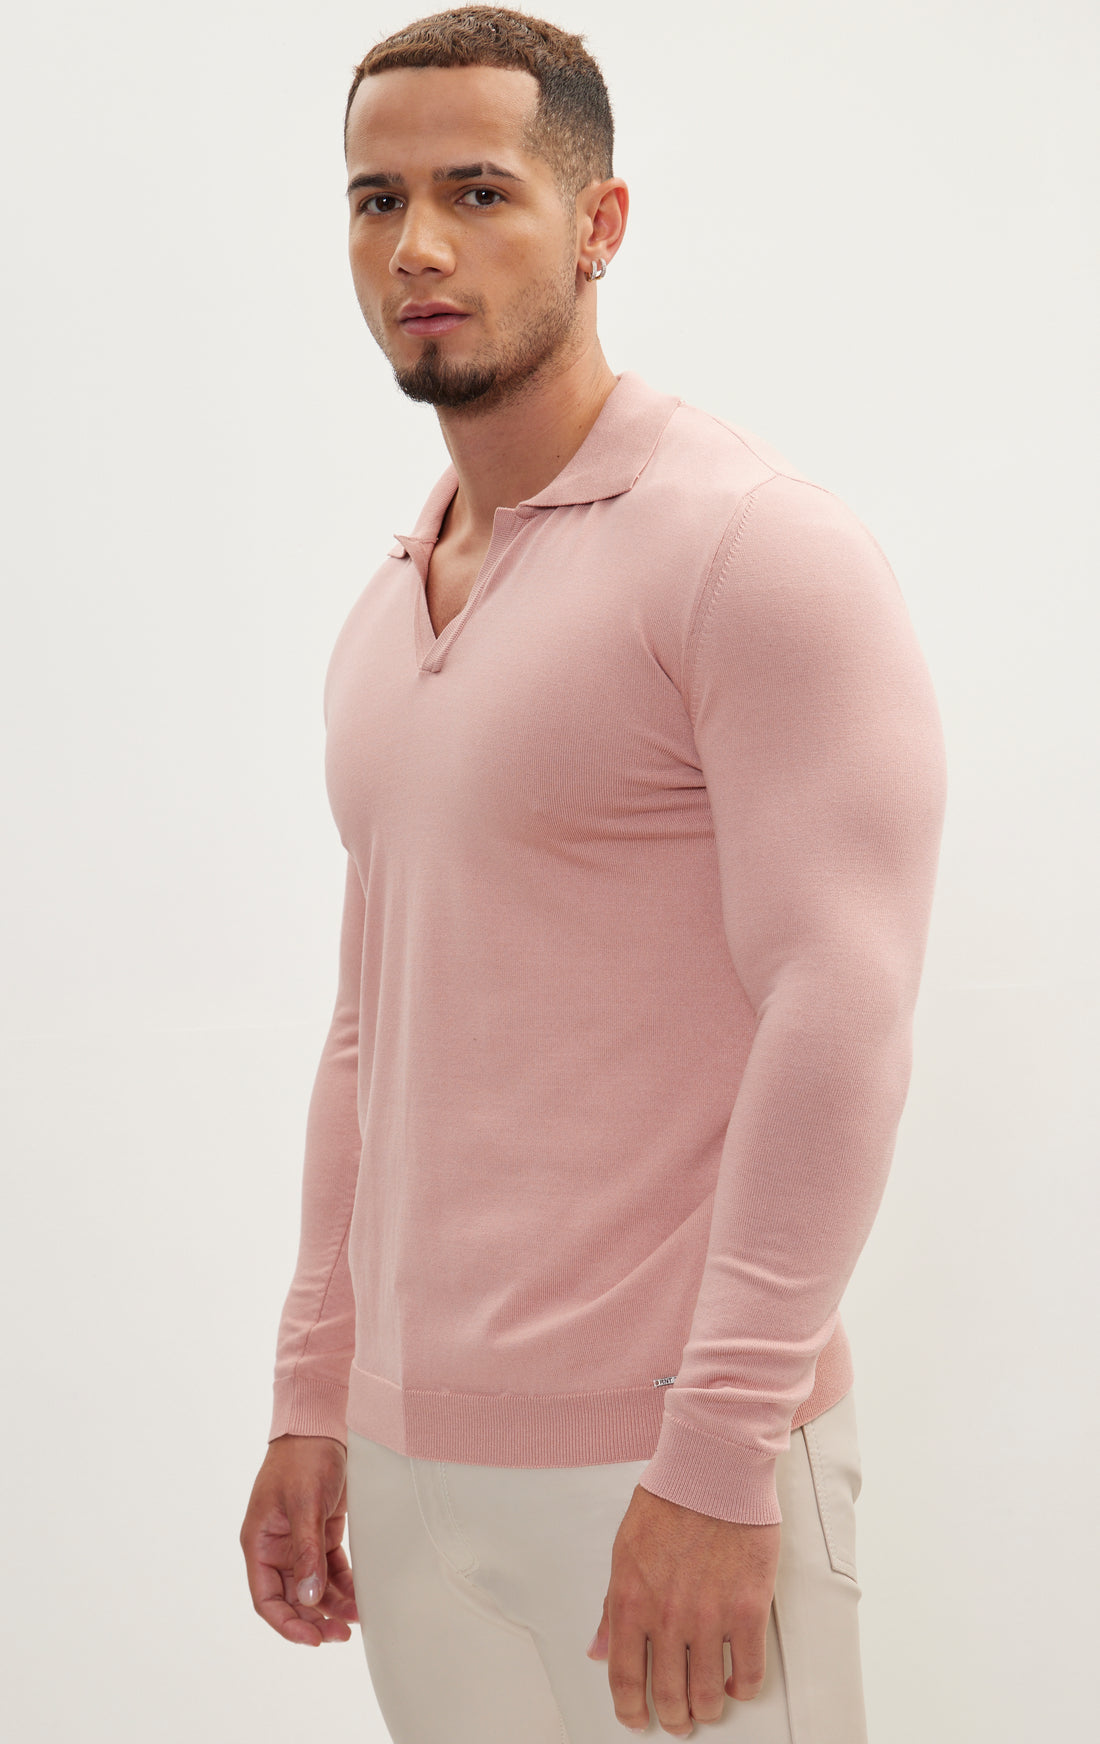 Johnny-Collar Sweater Polo - Rose